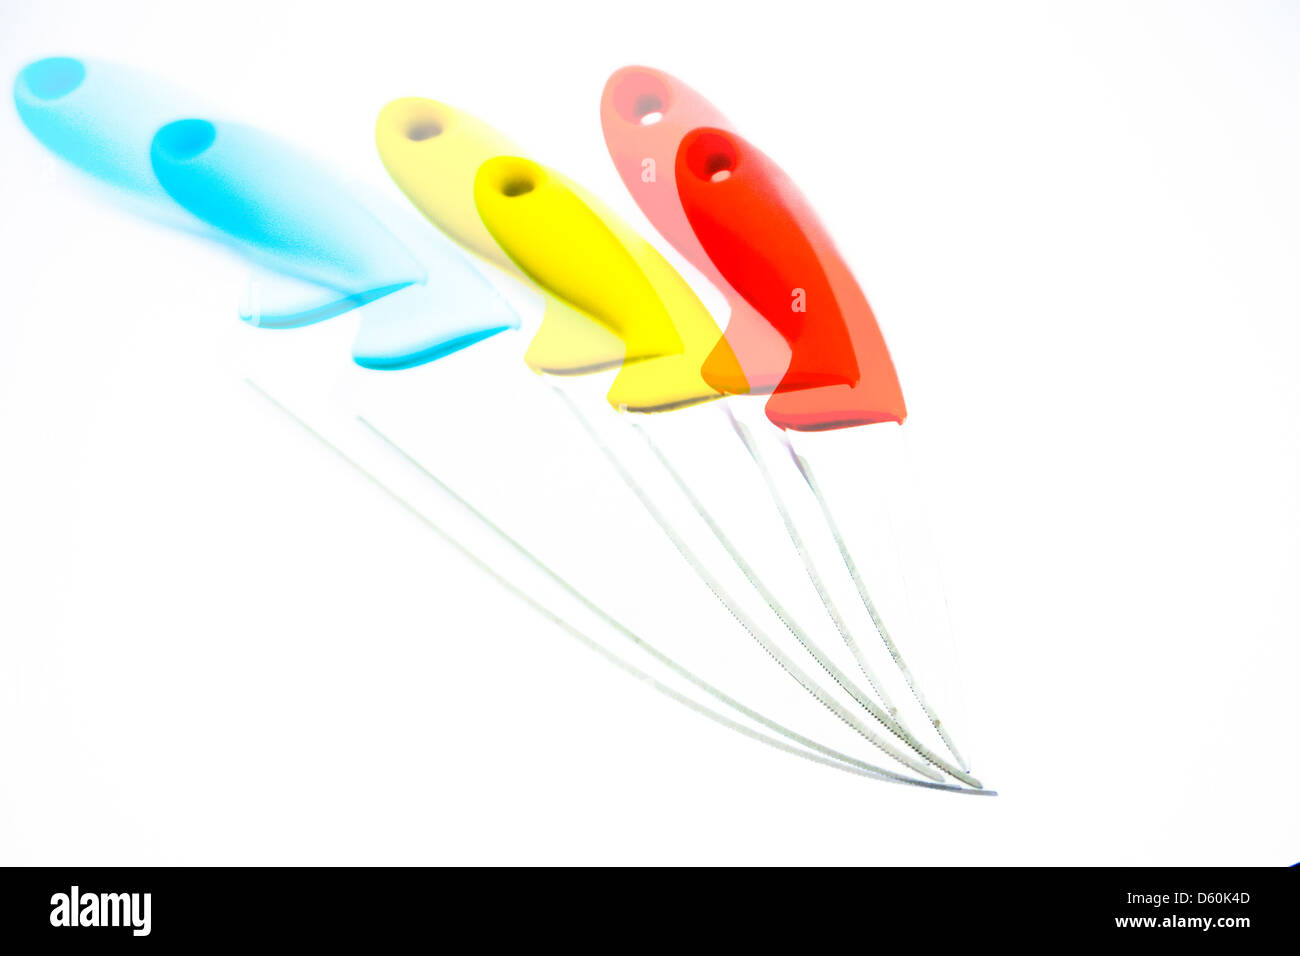 Three kitchen knives with colourful plastic handles Stock Photo